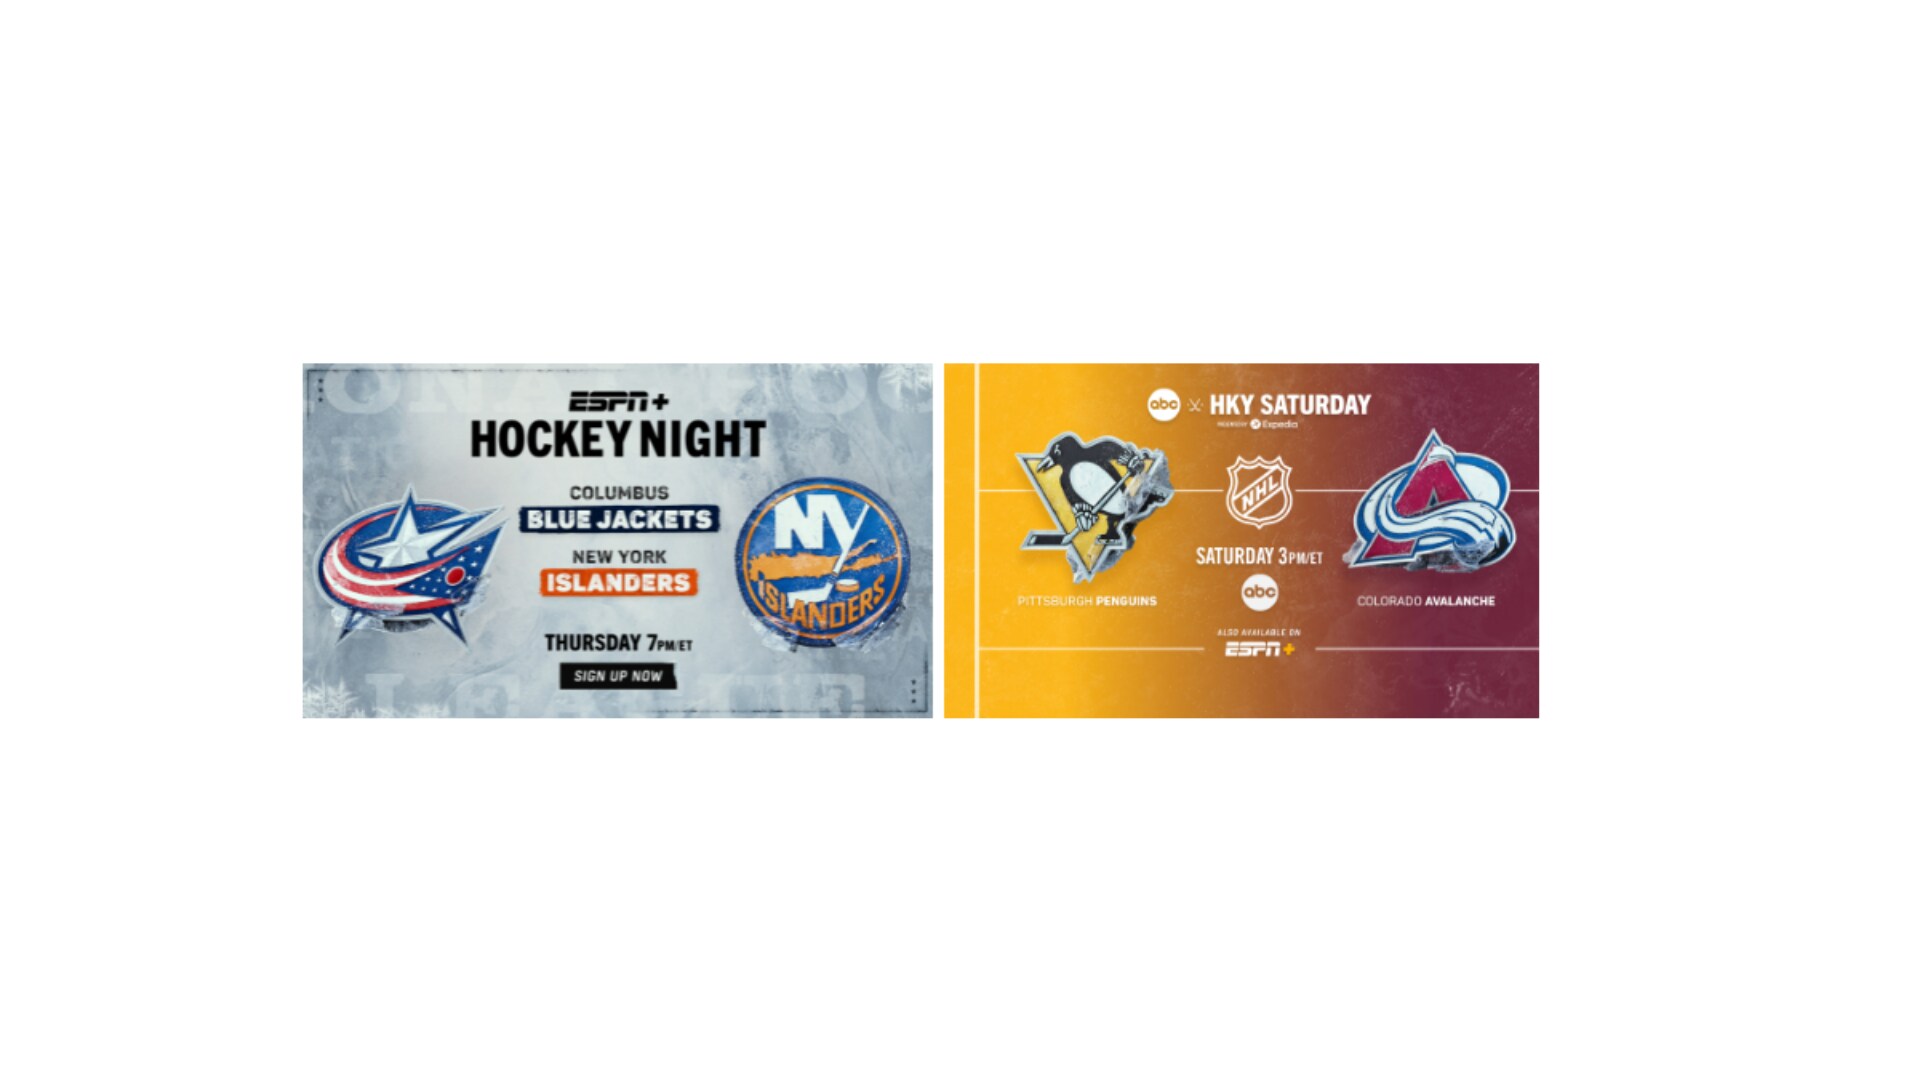 Exclusively on ABC, ESPN+ and Hulu This Week: Three National Hockey League Games Tonight, Thursday, Saturday